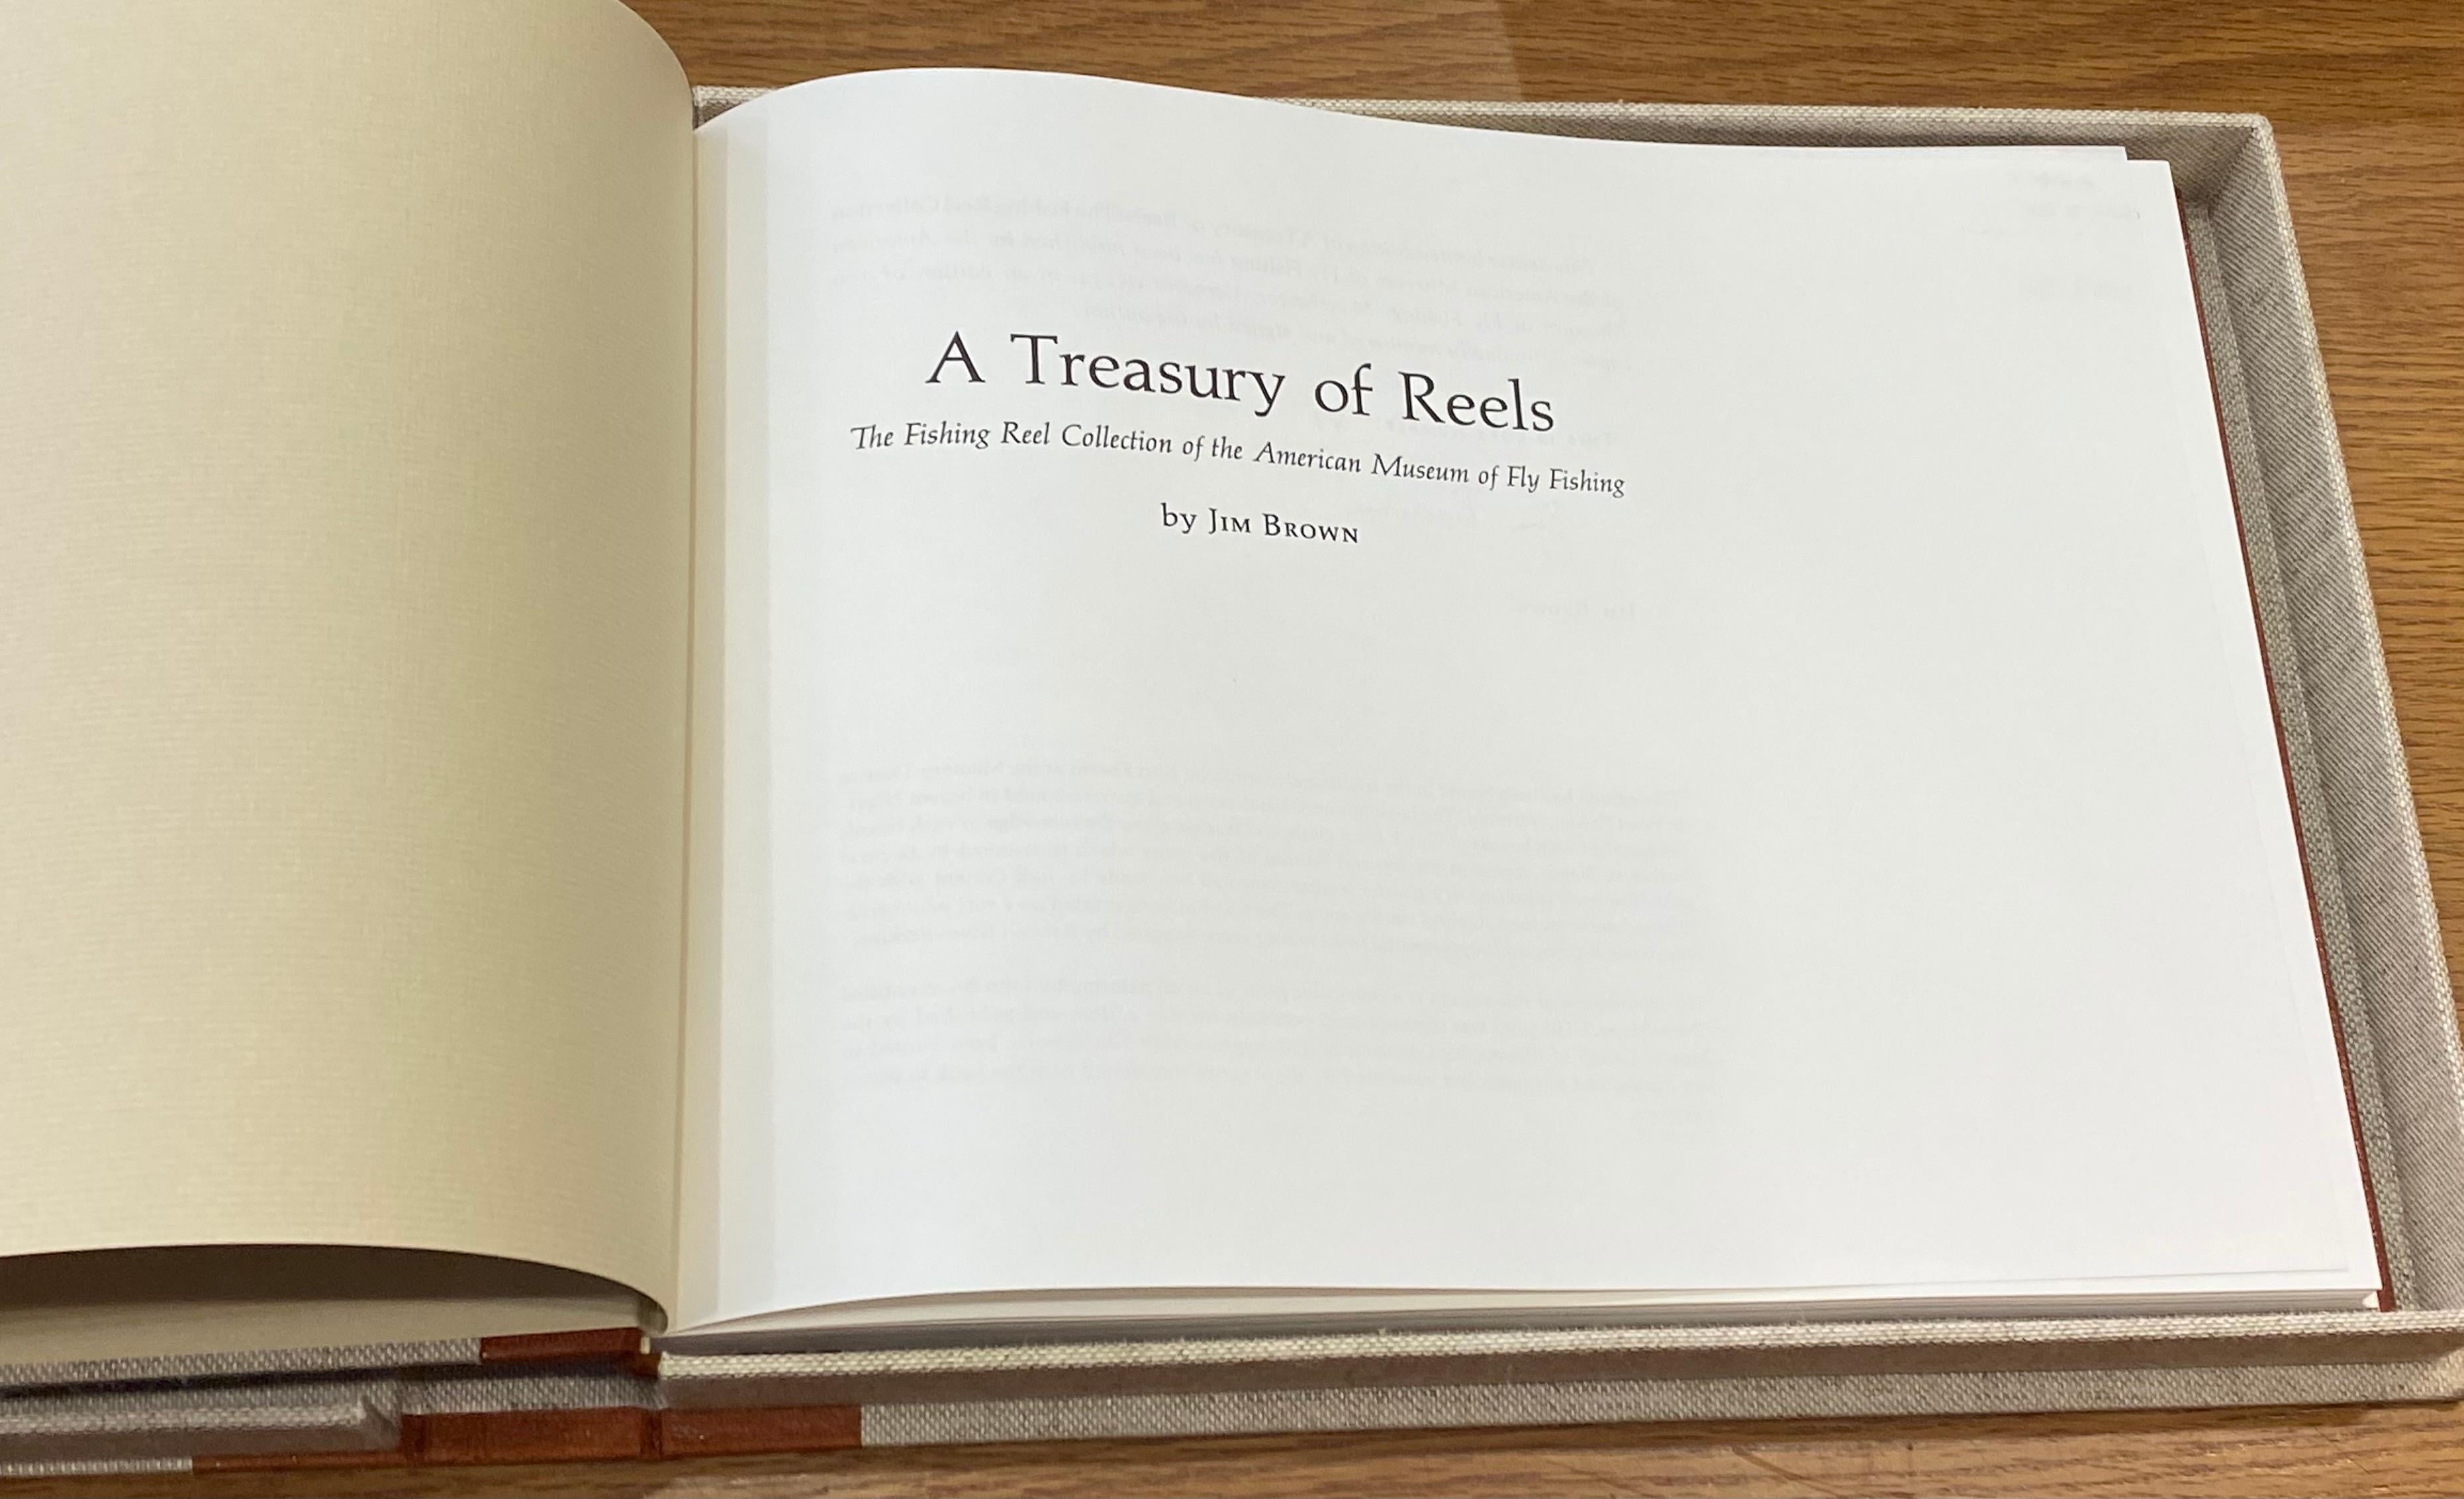 A Treasury of Reels: The Fishing Reel Collection of the American Museum of Fly Fishing, Limited Edition 81 of 100

Brown, Jim. A Treasury of Reels: The Fishing Reel Collection of the American Museum of Fly Fishing. Manchester: American Museum of